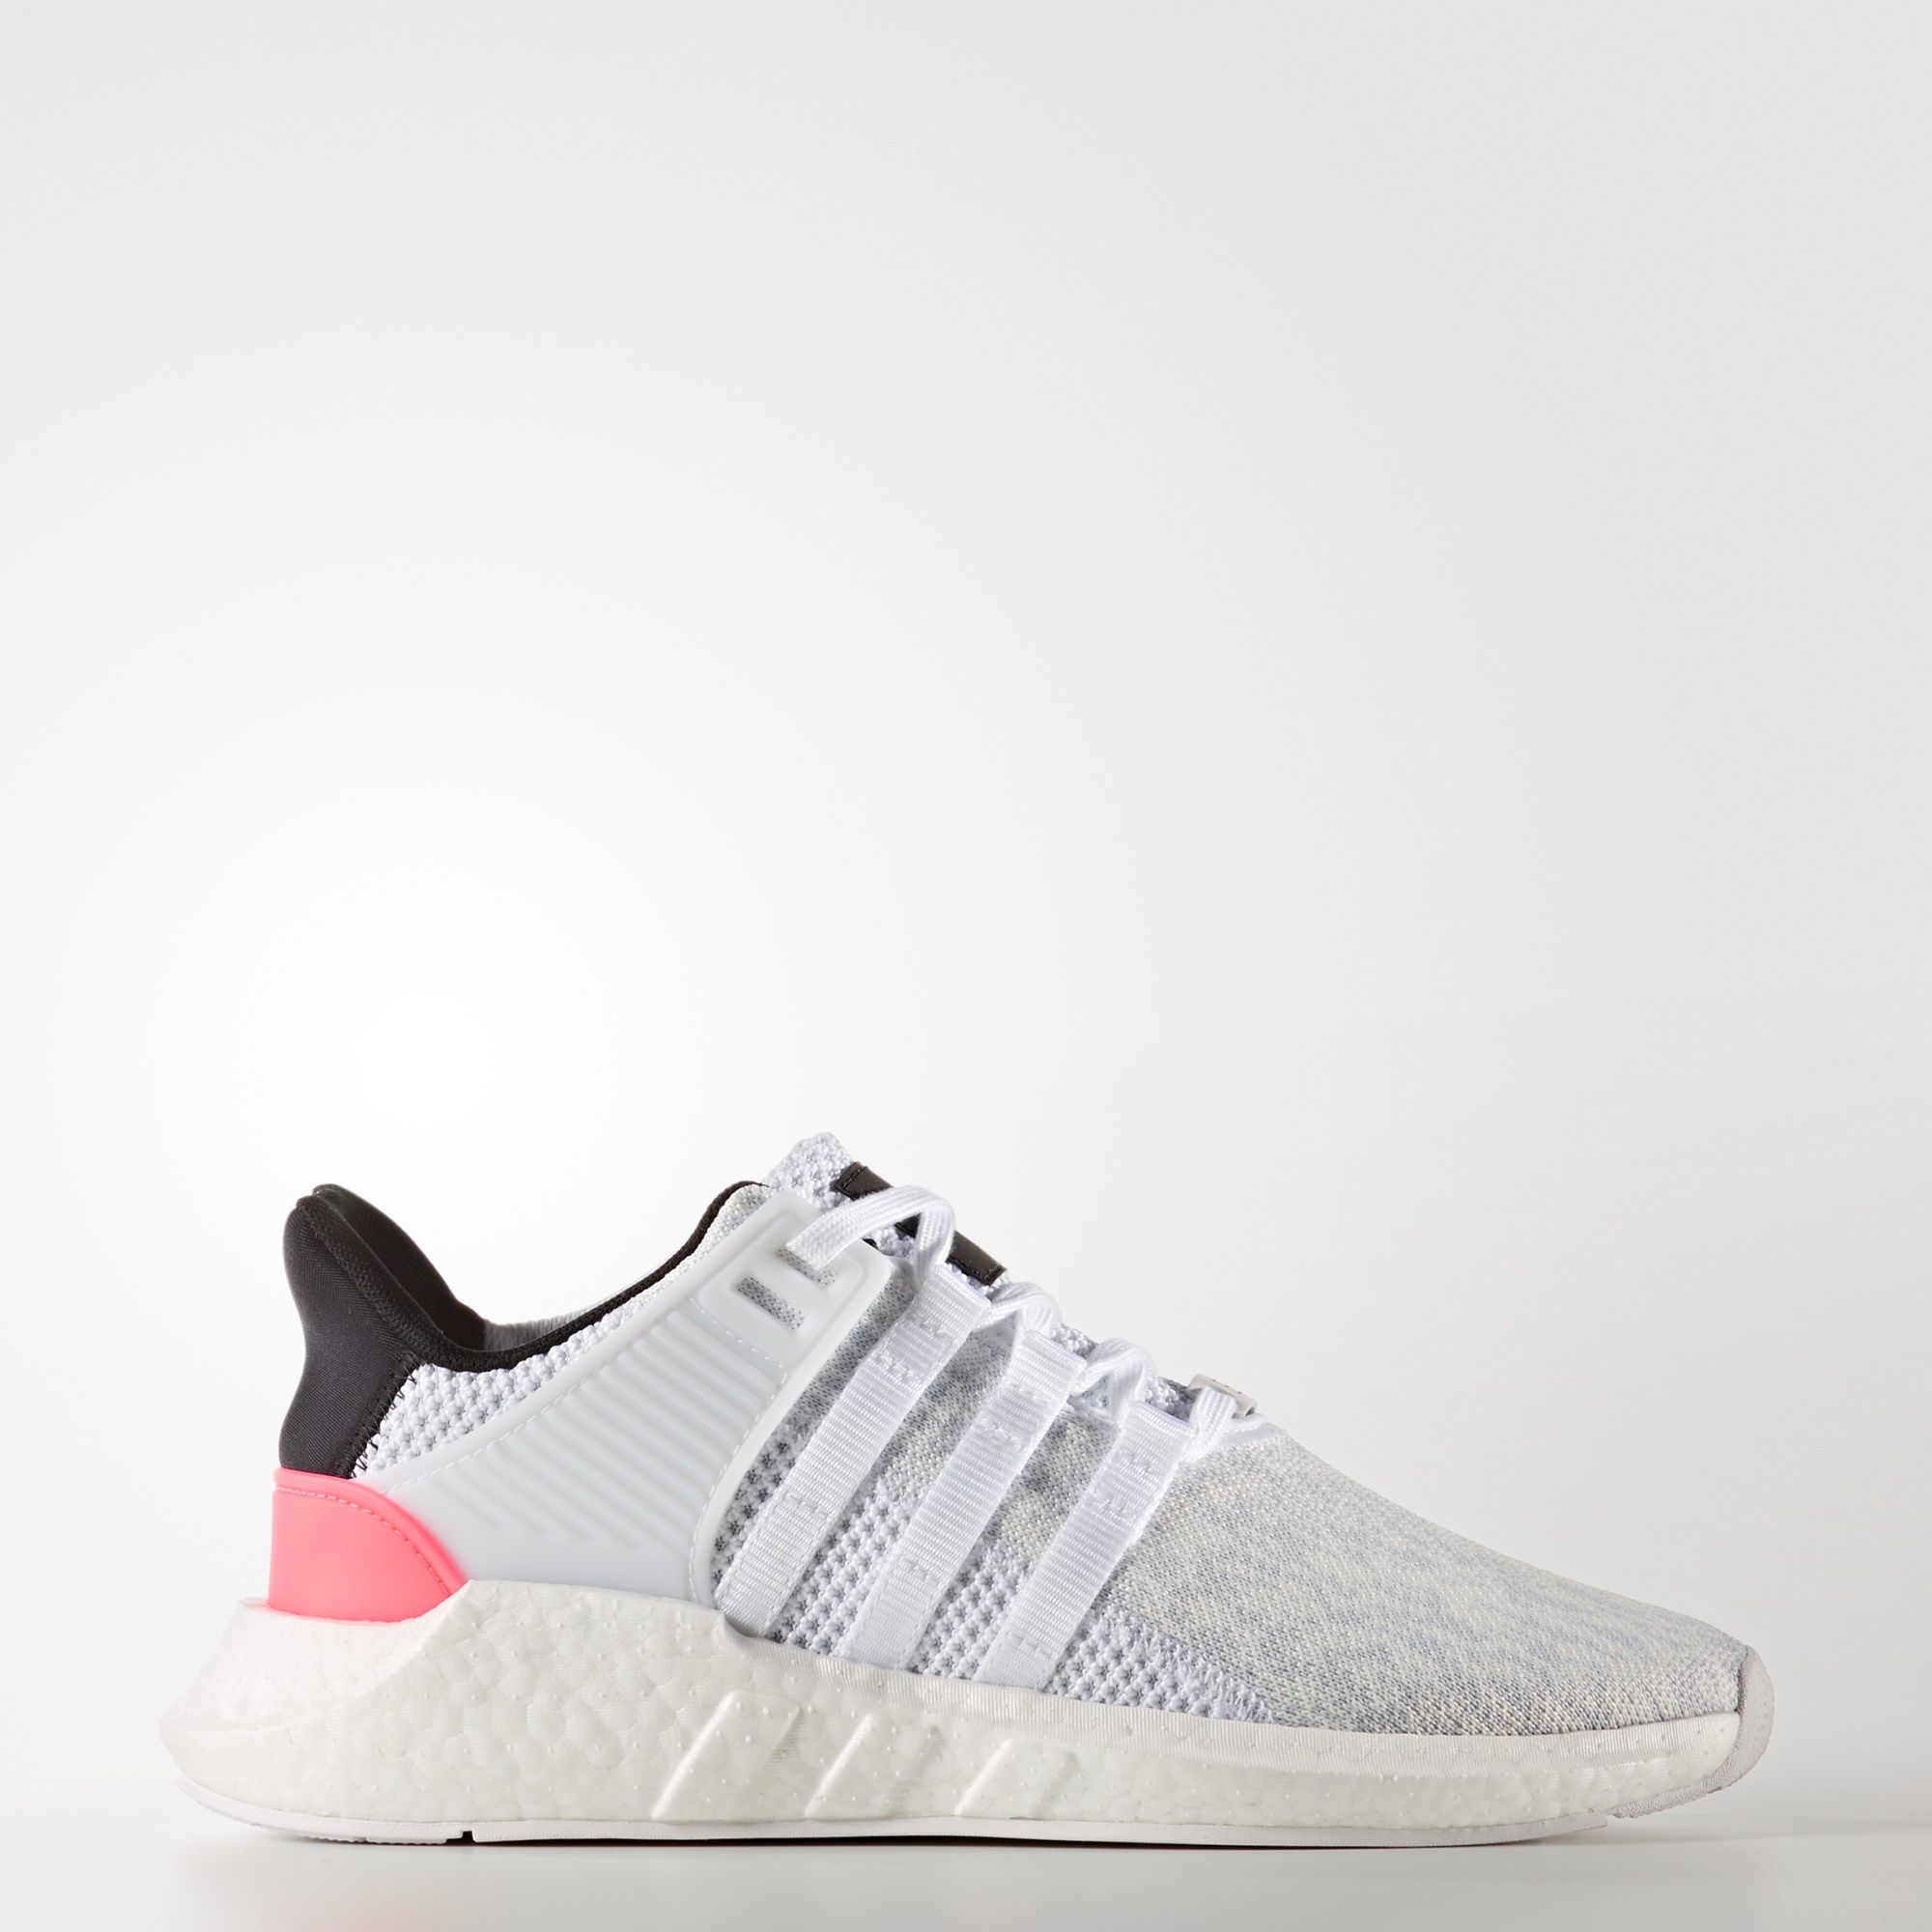 adidas-eqt-support-9317-white-turbo-red-2